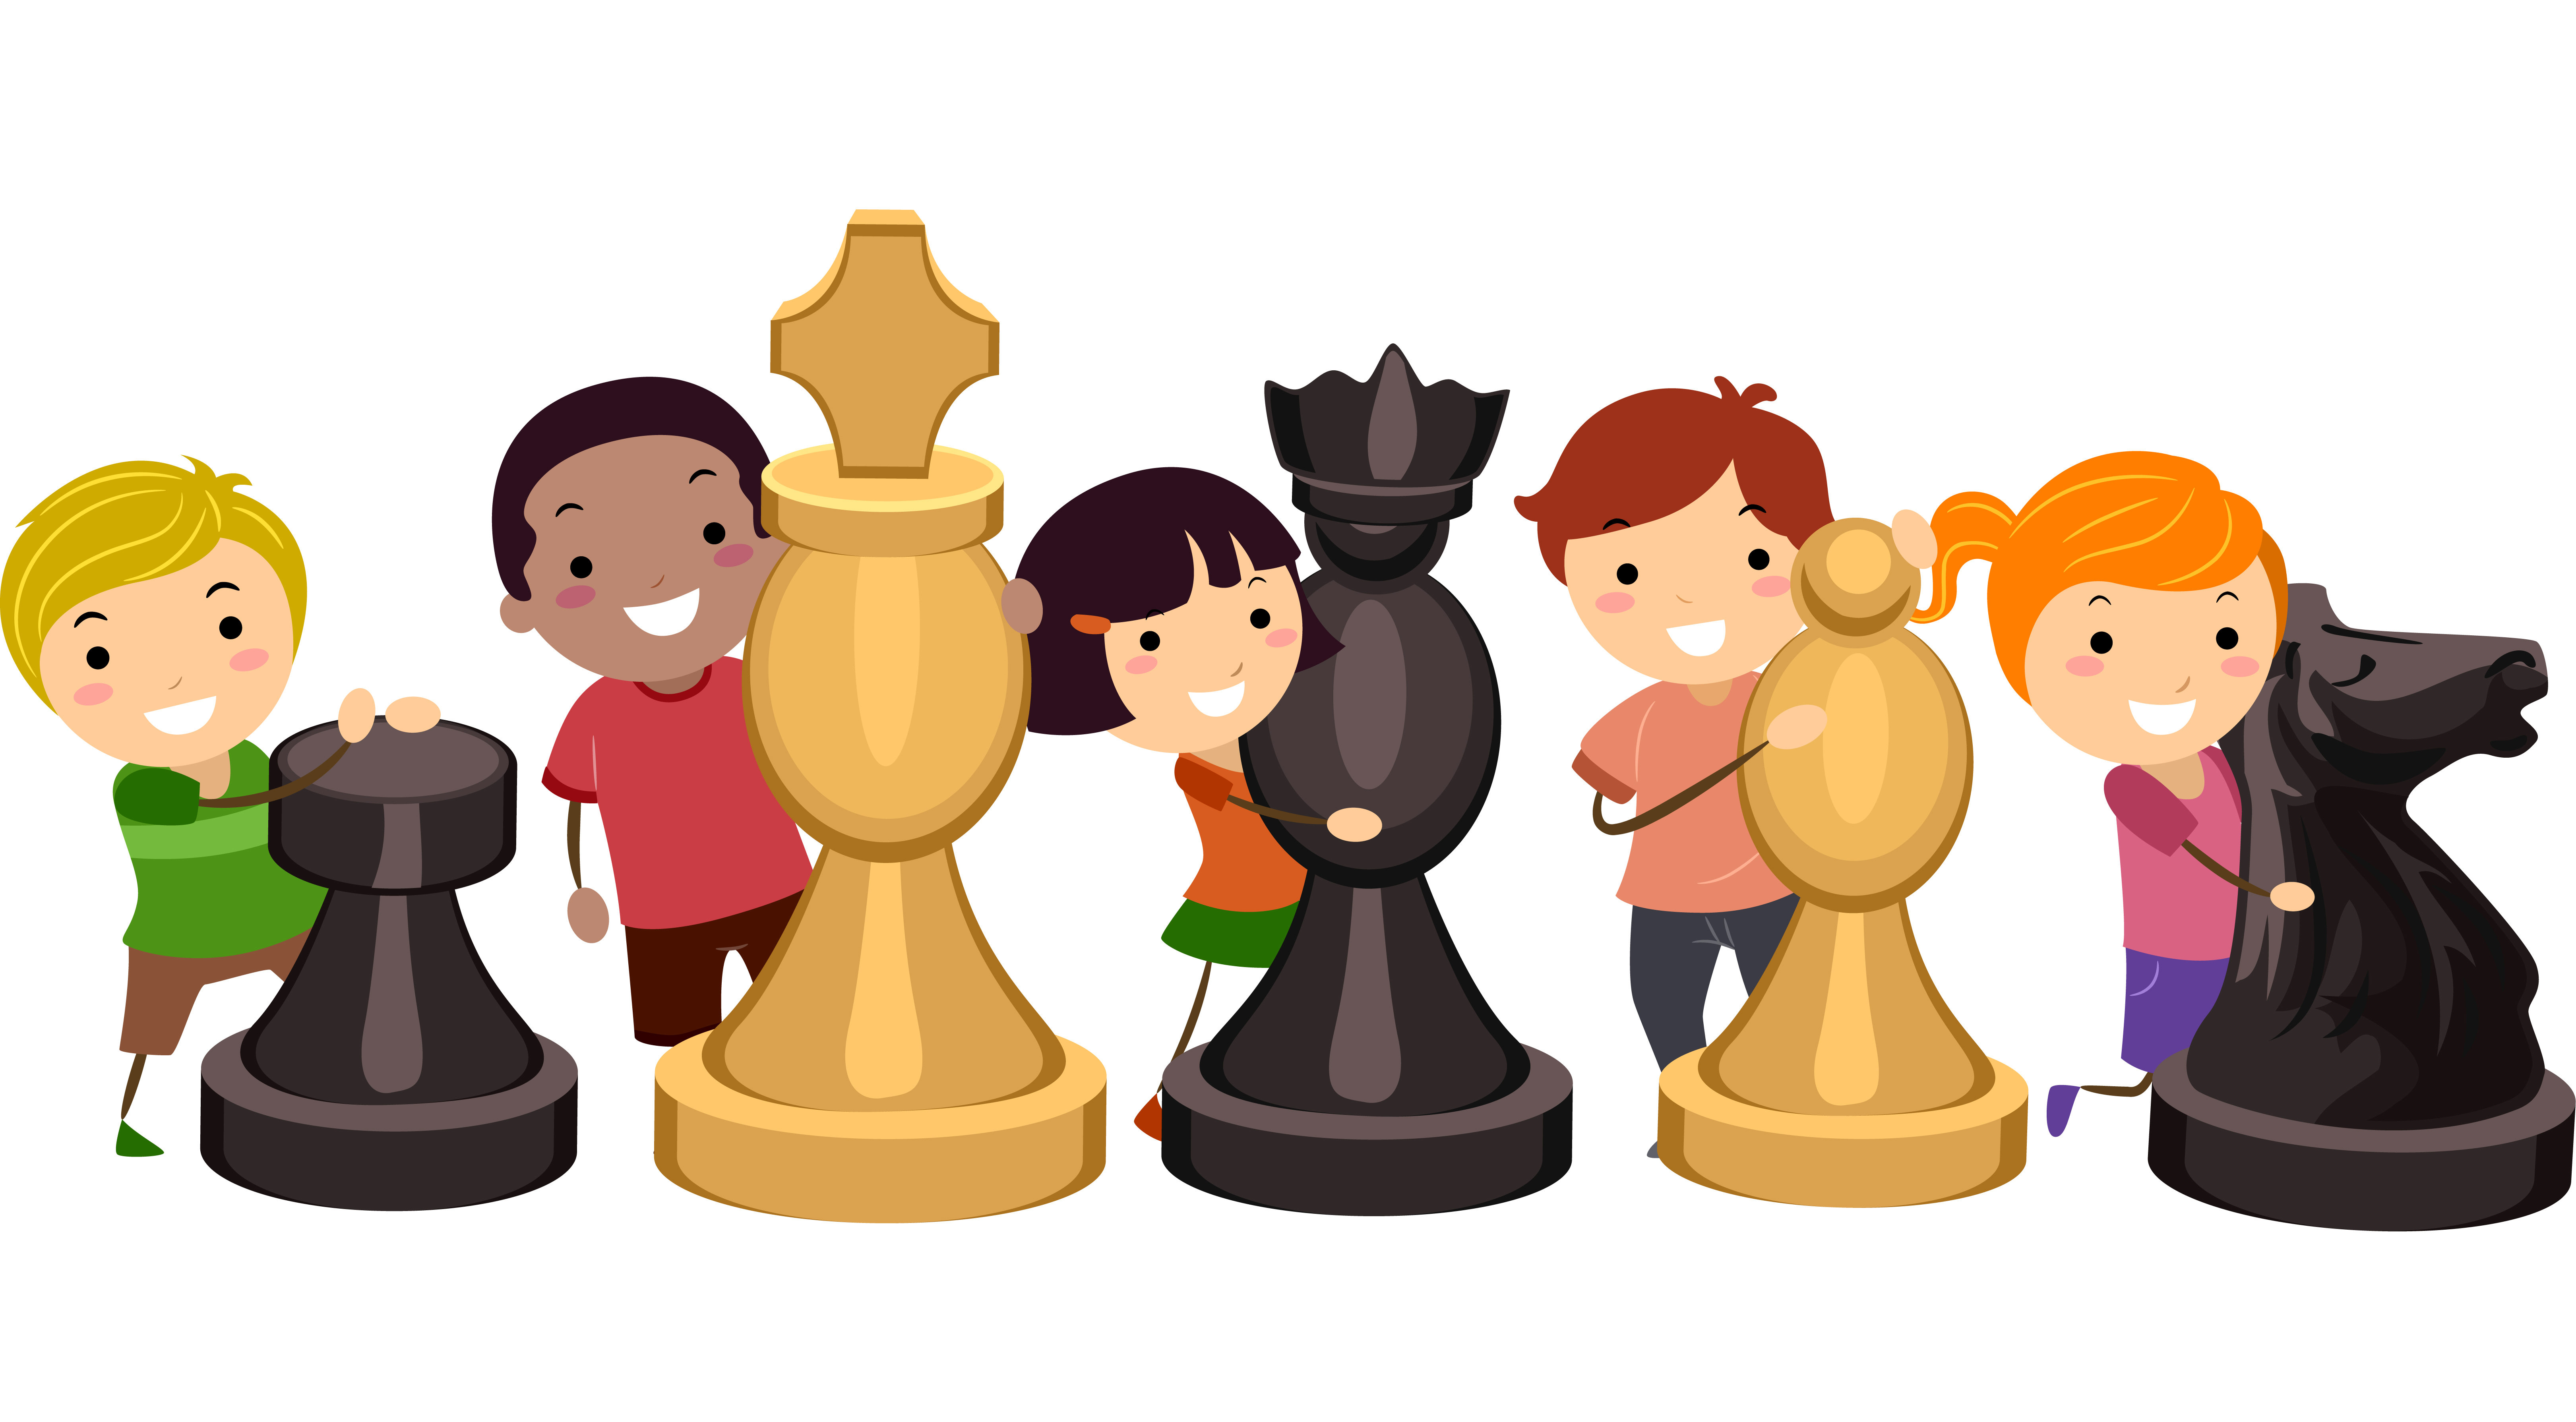 Chess pieces and kids.